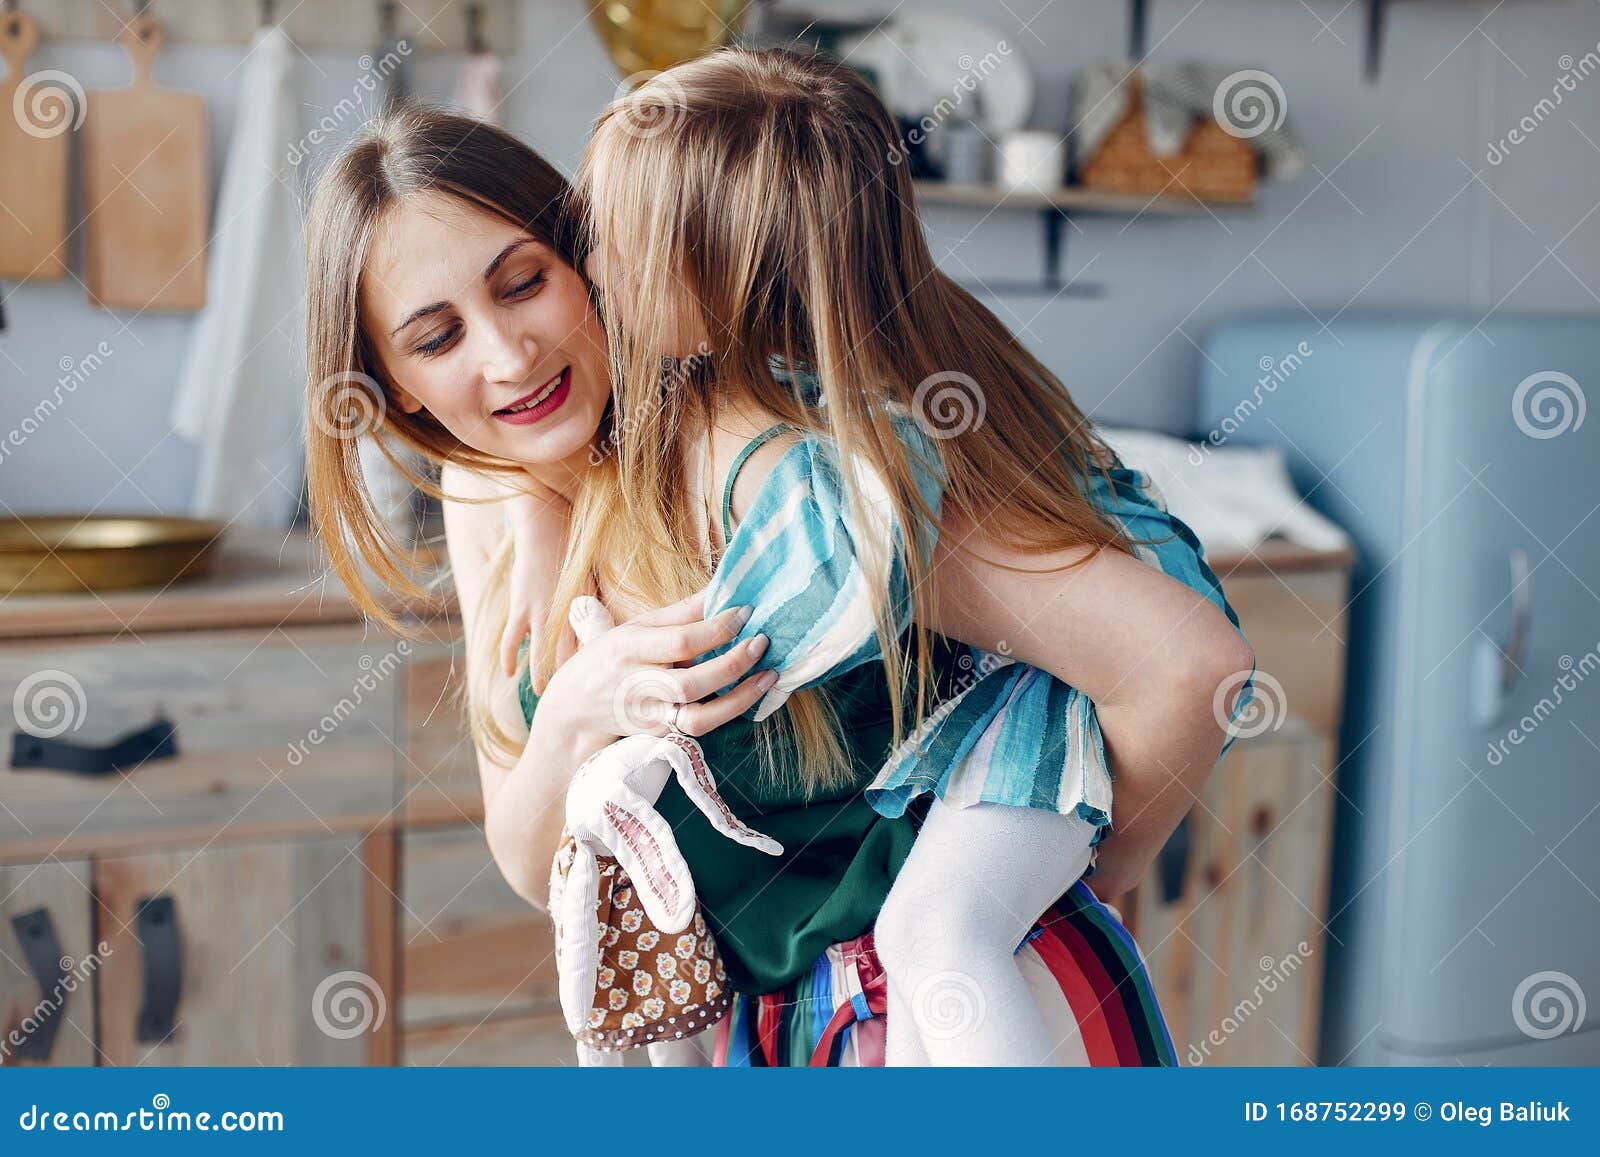 Mother with Little Daughter in a Room Stock Image - Image of baby, girl ...